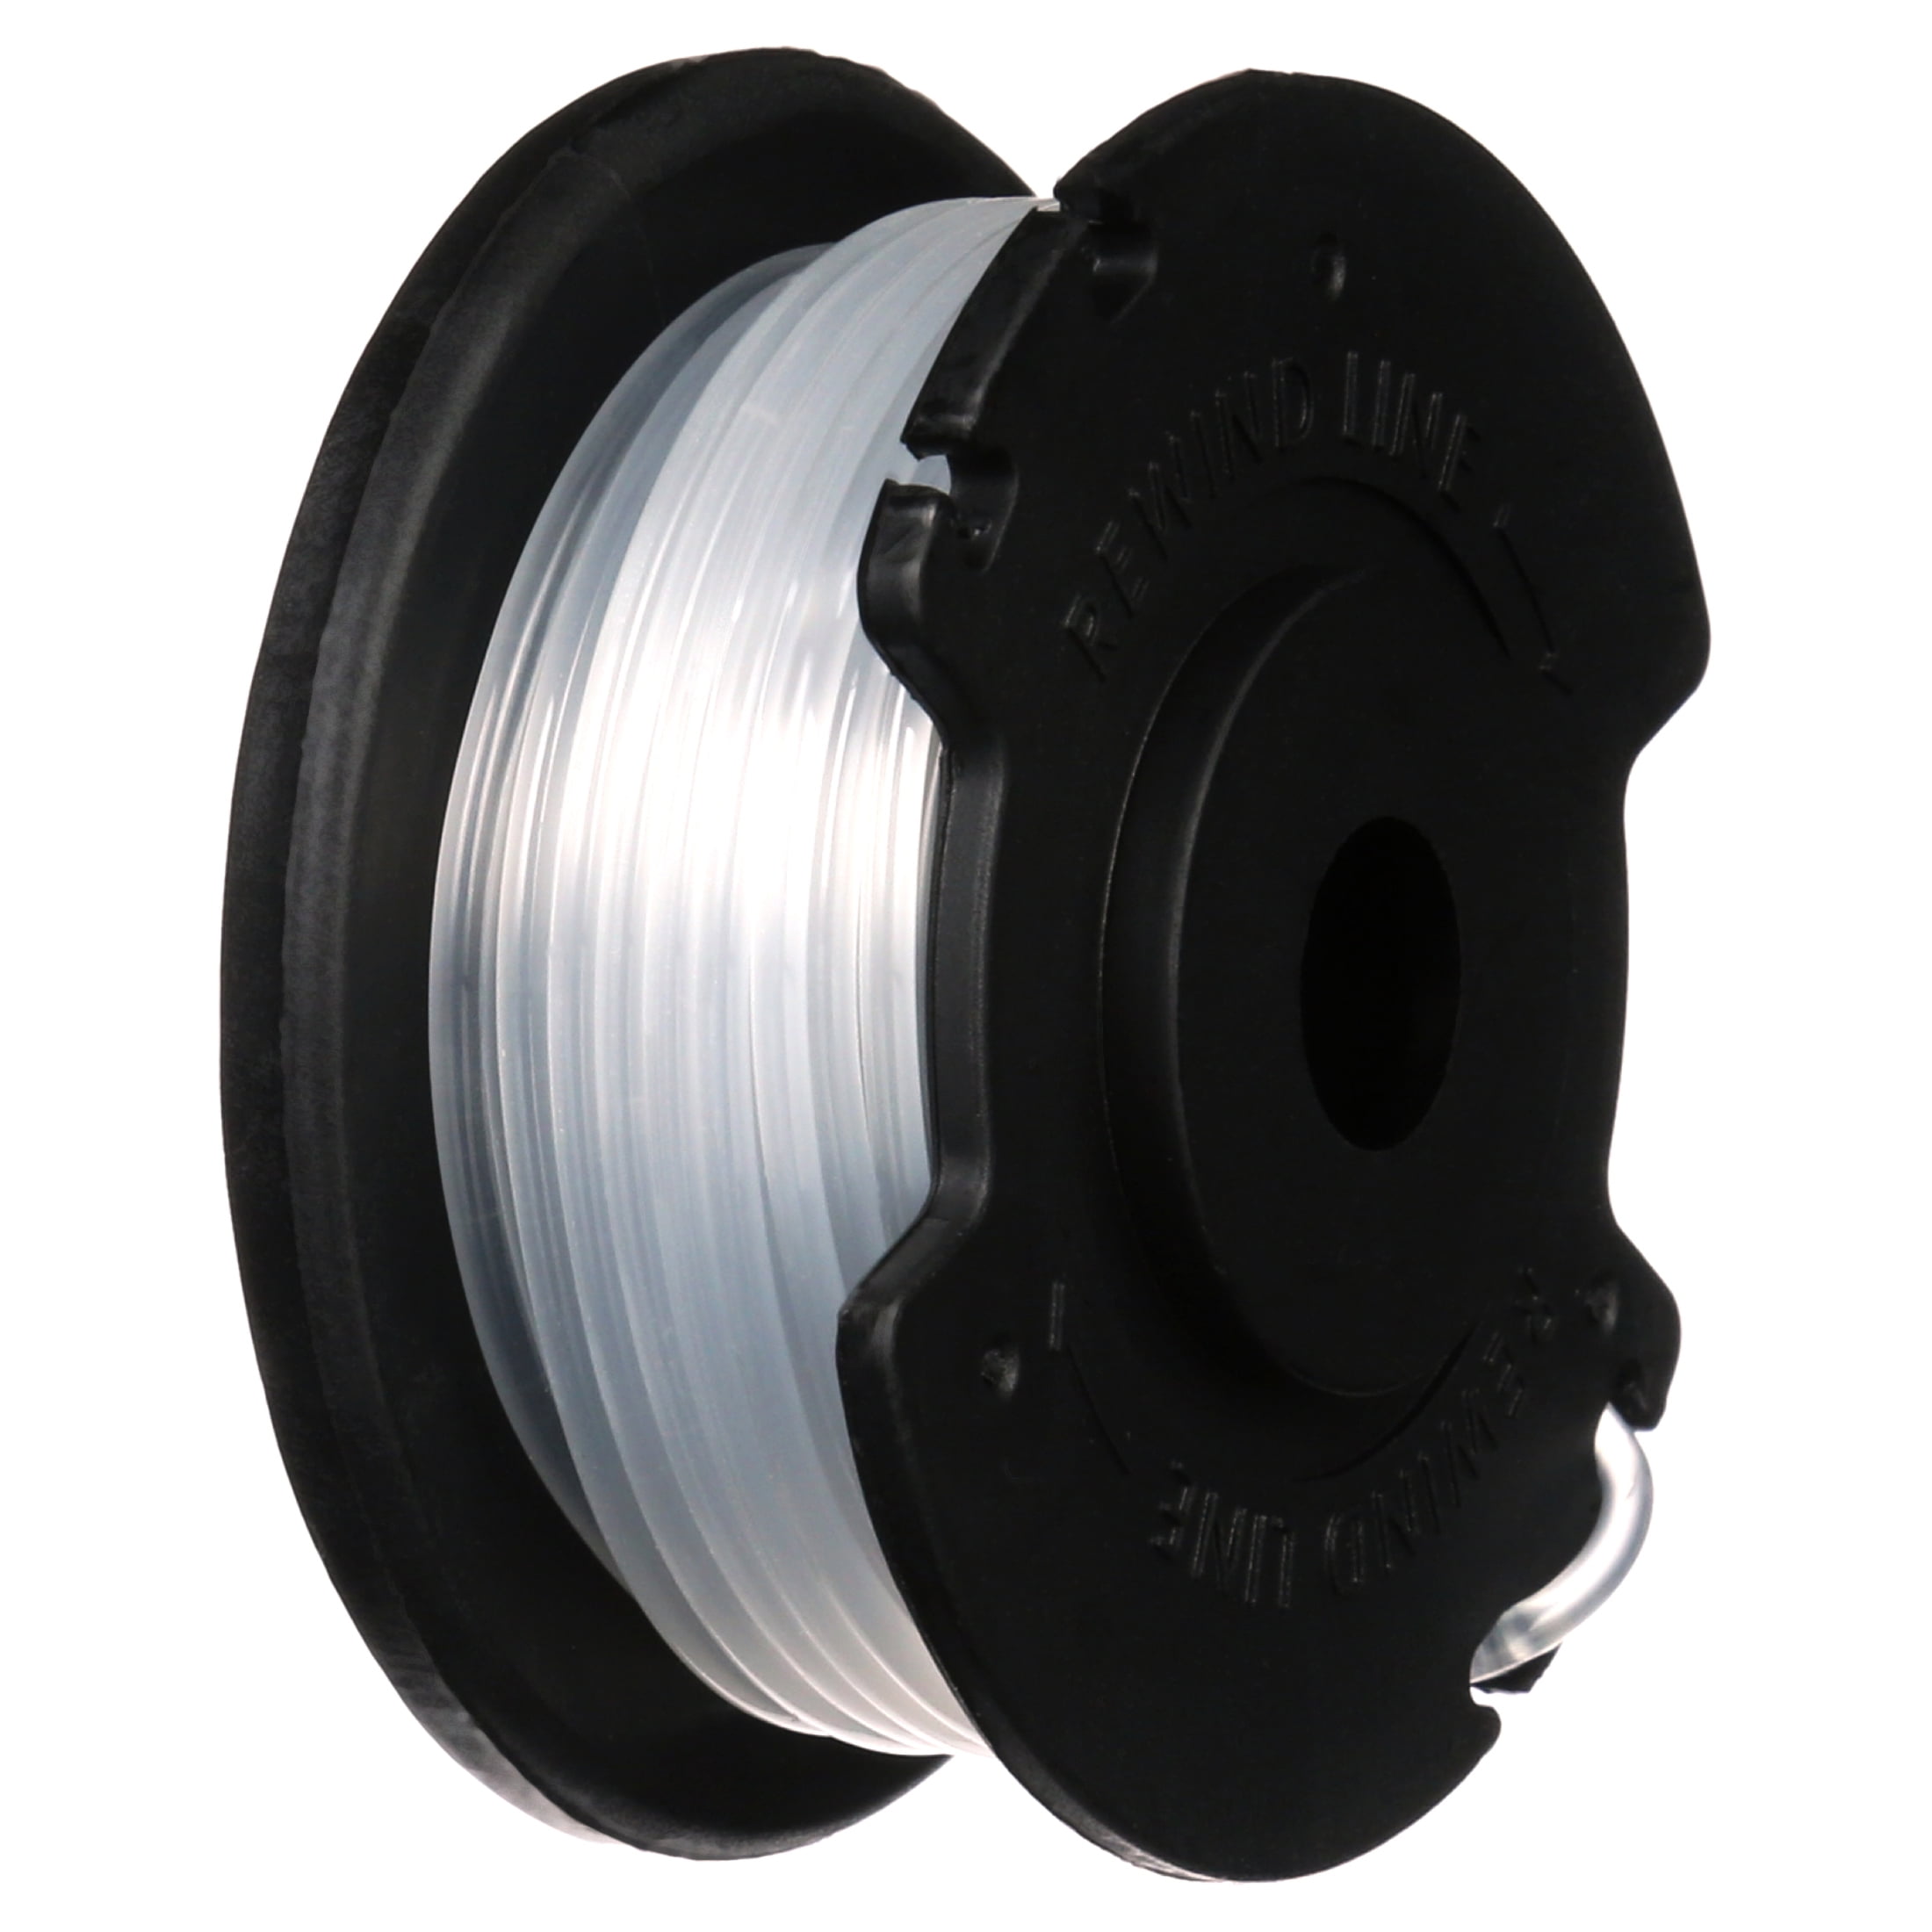 MaxPower Weed Trimmer Replacement Spool and Line, 0.06 in. x 31 ft., Black  & Decker OEM # AF-100 at Tractor Supply Co.